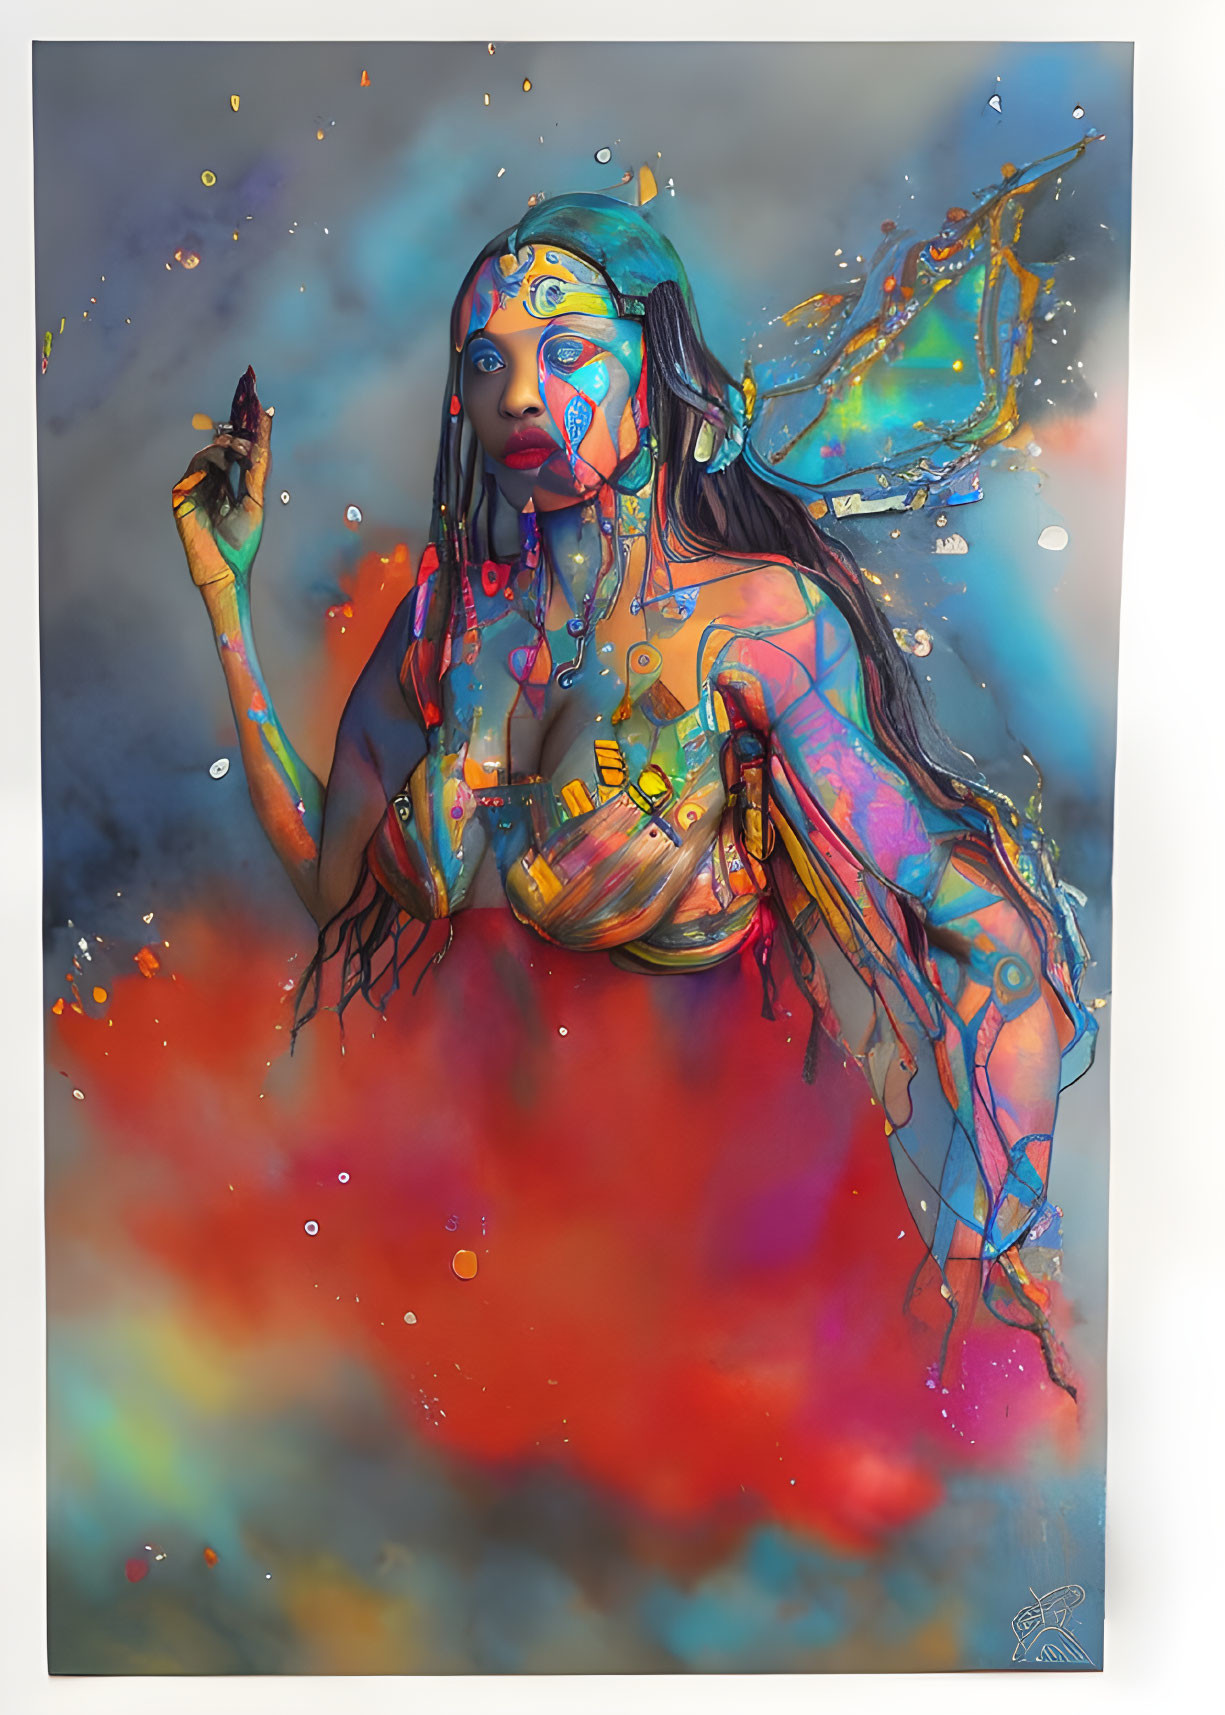 Vibrant woman with multicolored body paint and translucent wings in nebula background